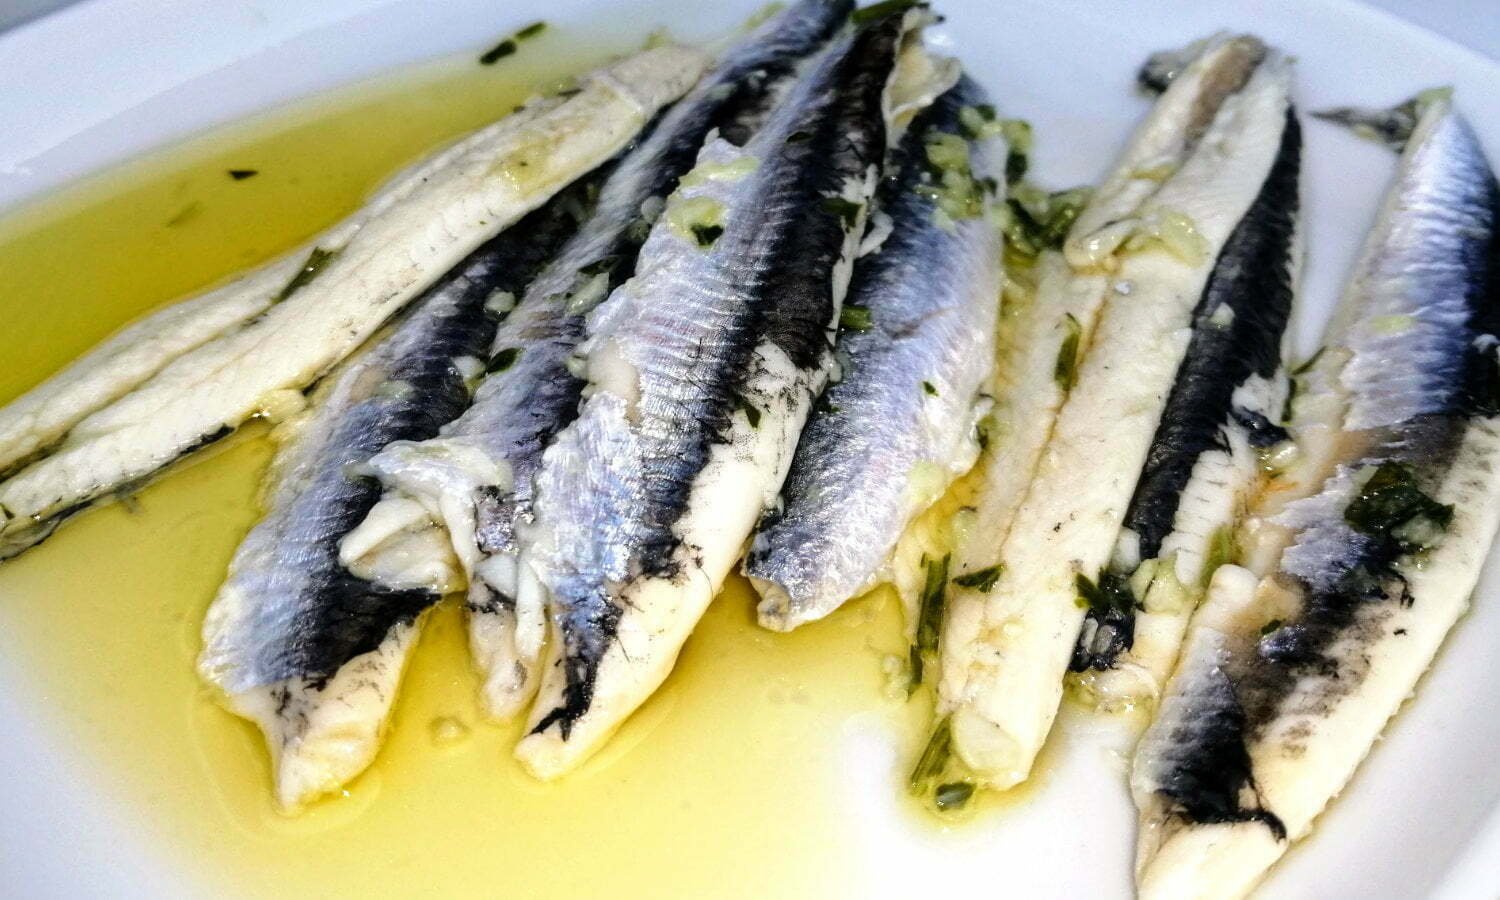 A plate of boquerones, spanish anchovies marinaded in vinegar, garlic, and parsley, and drizzled with extra virgin olive oil